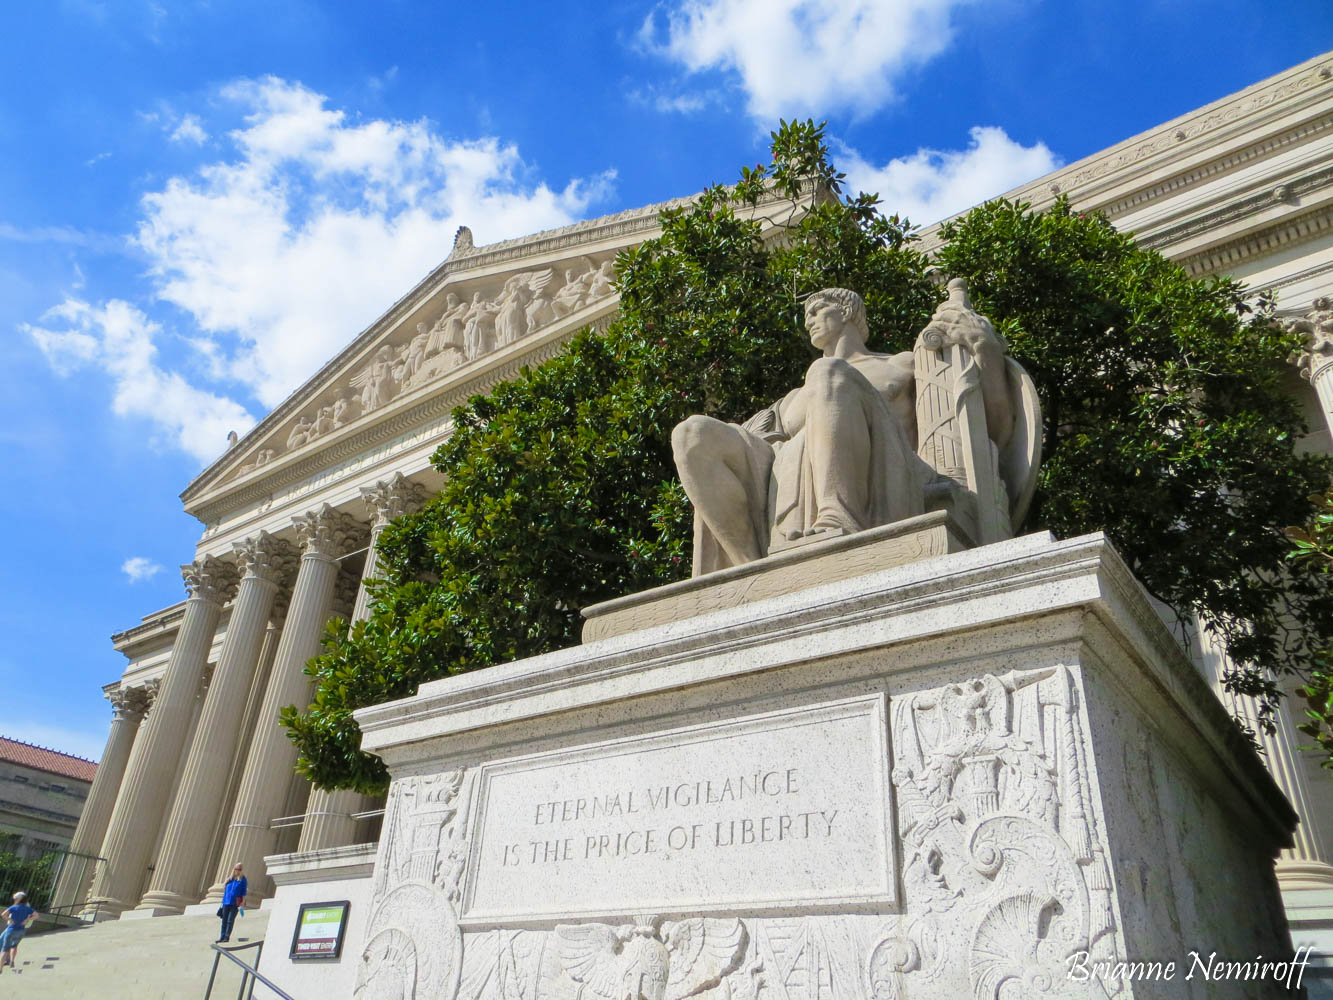 The National Archives in Washington D.C.